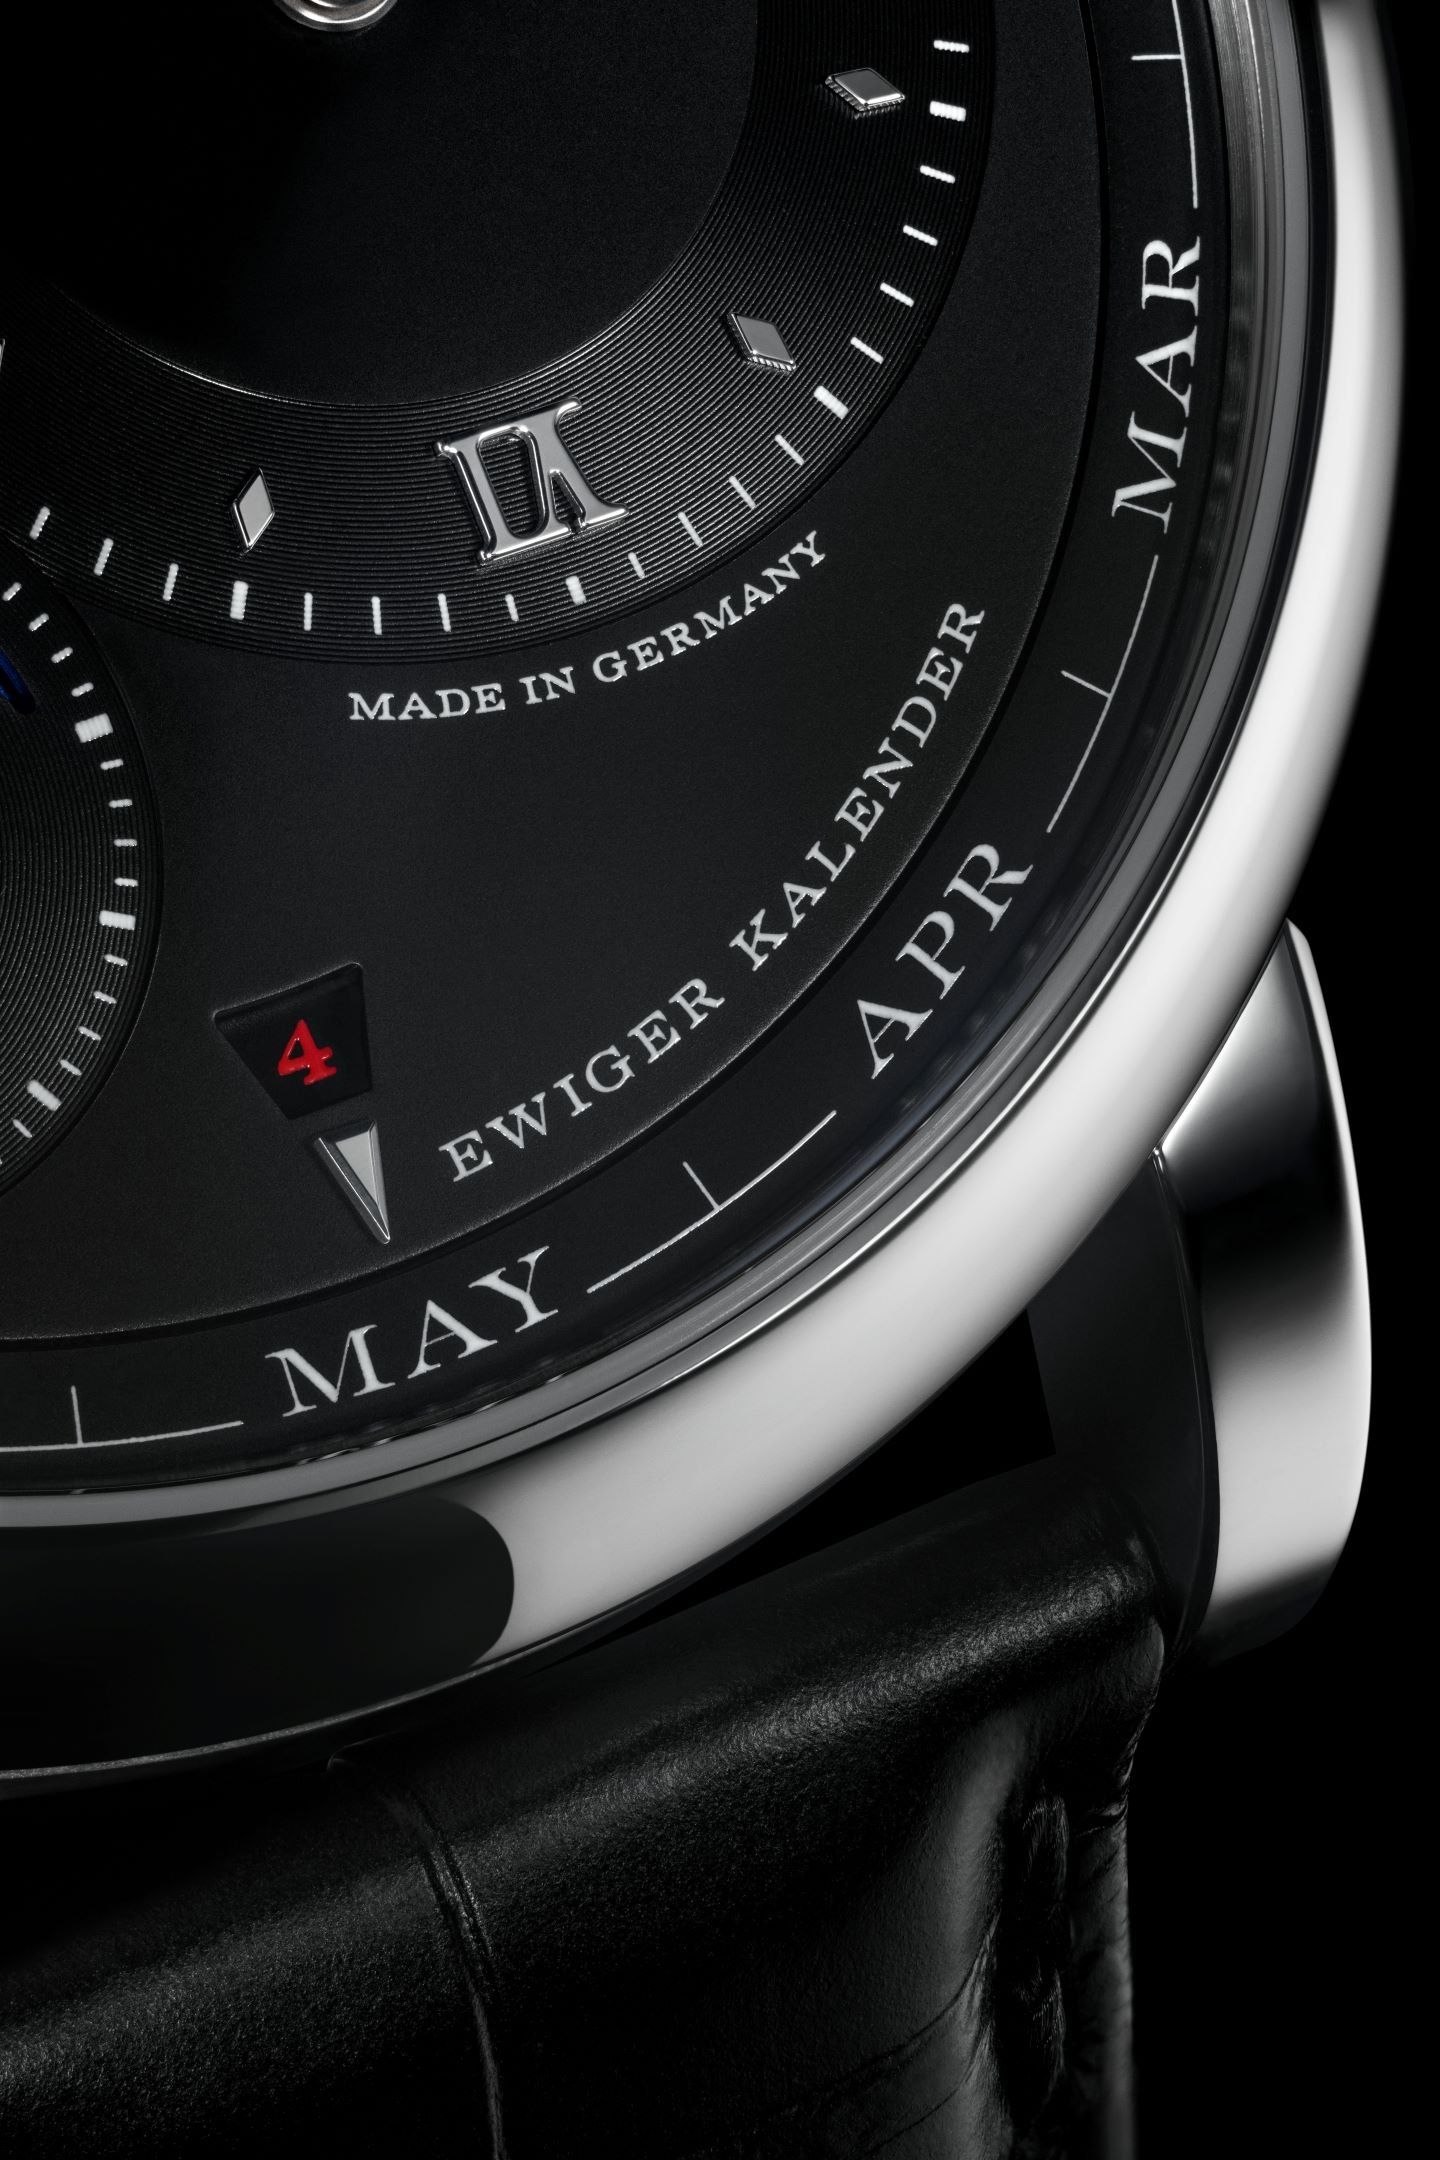 The detailing on the dial